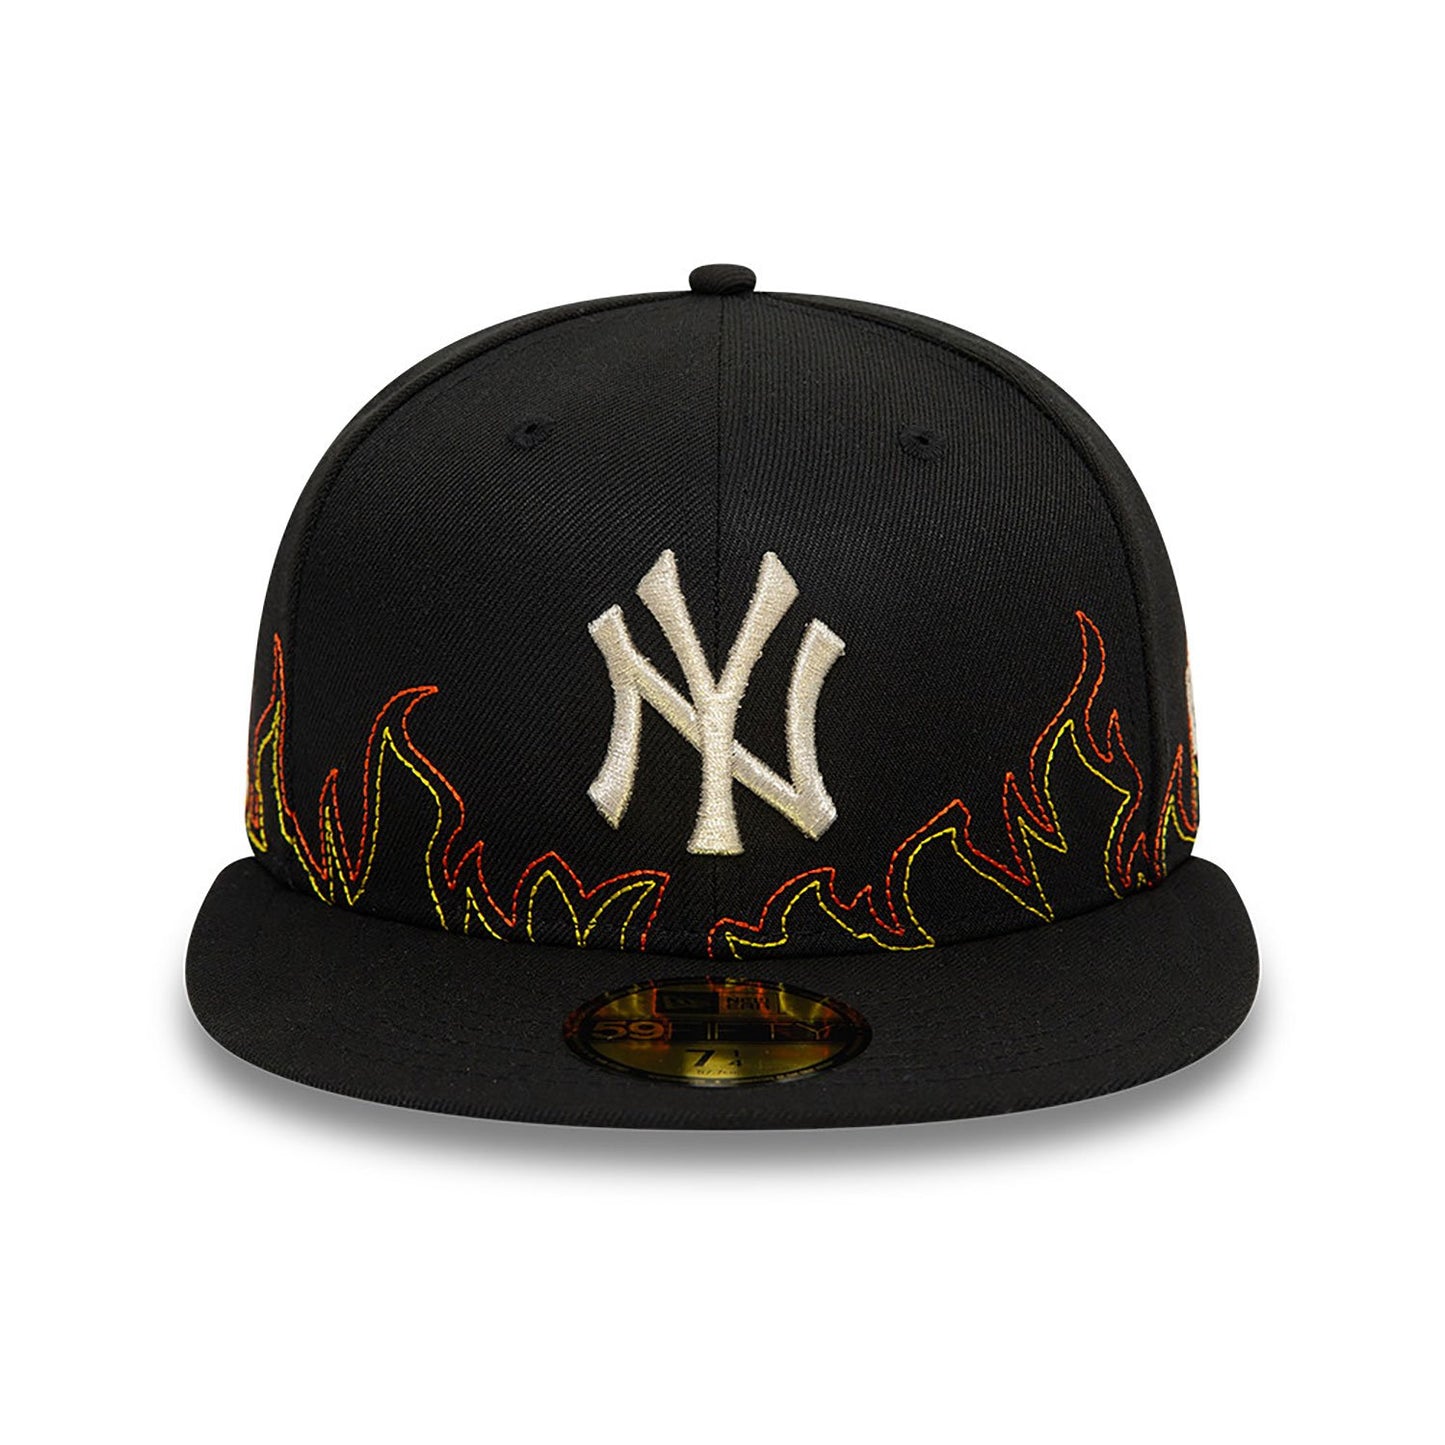 Fire NYC fitted